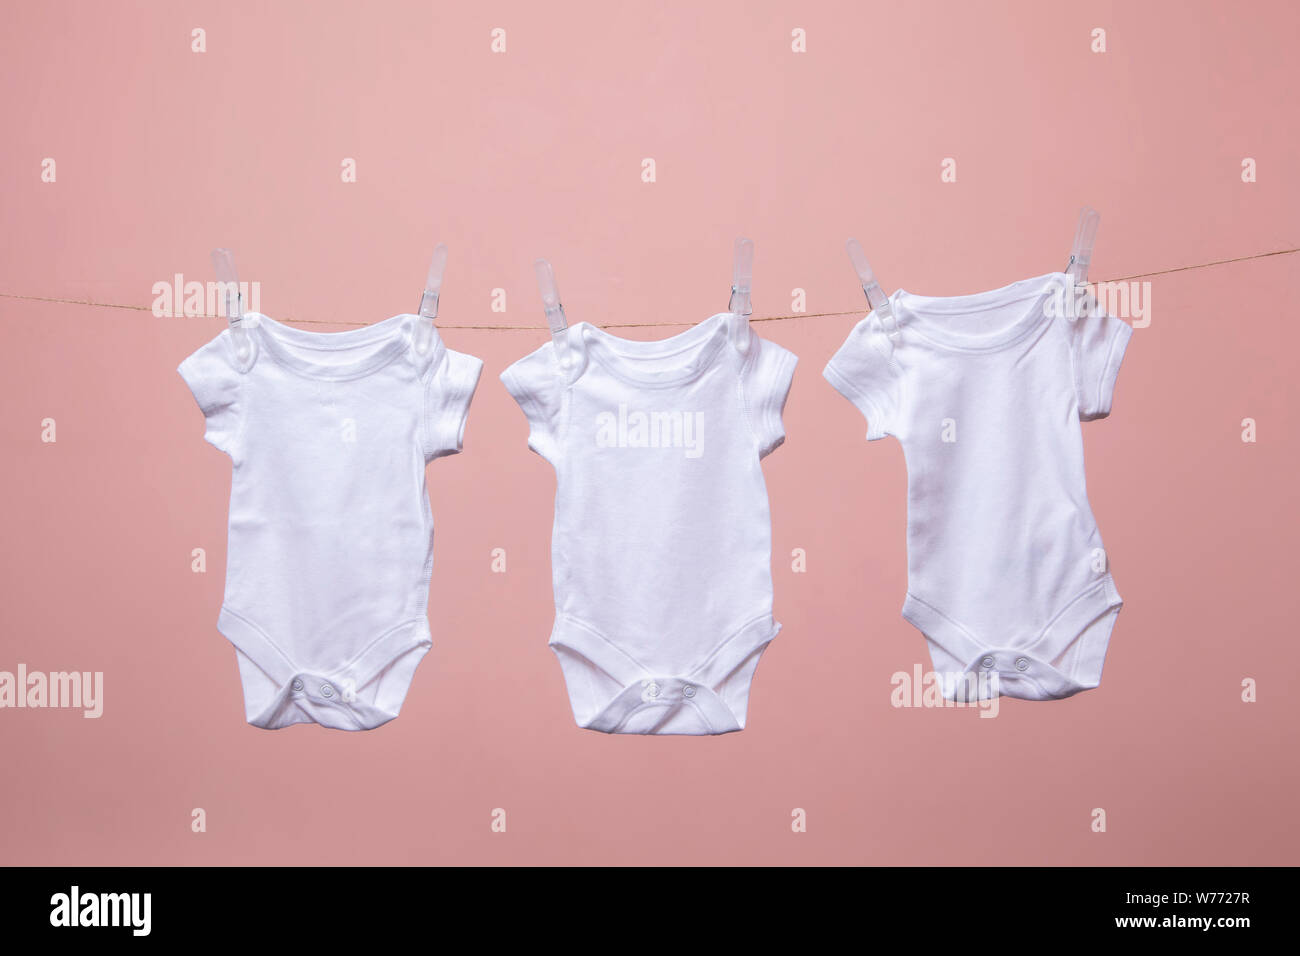 White baby body suit hanging from a line against a pink background Stock Photo